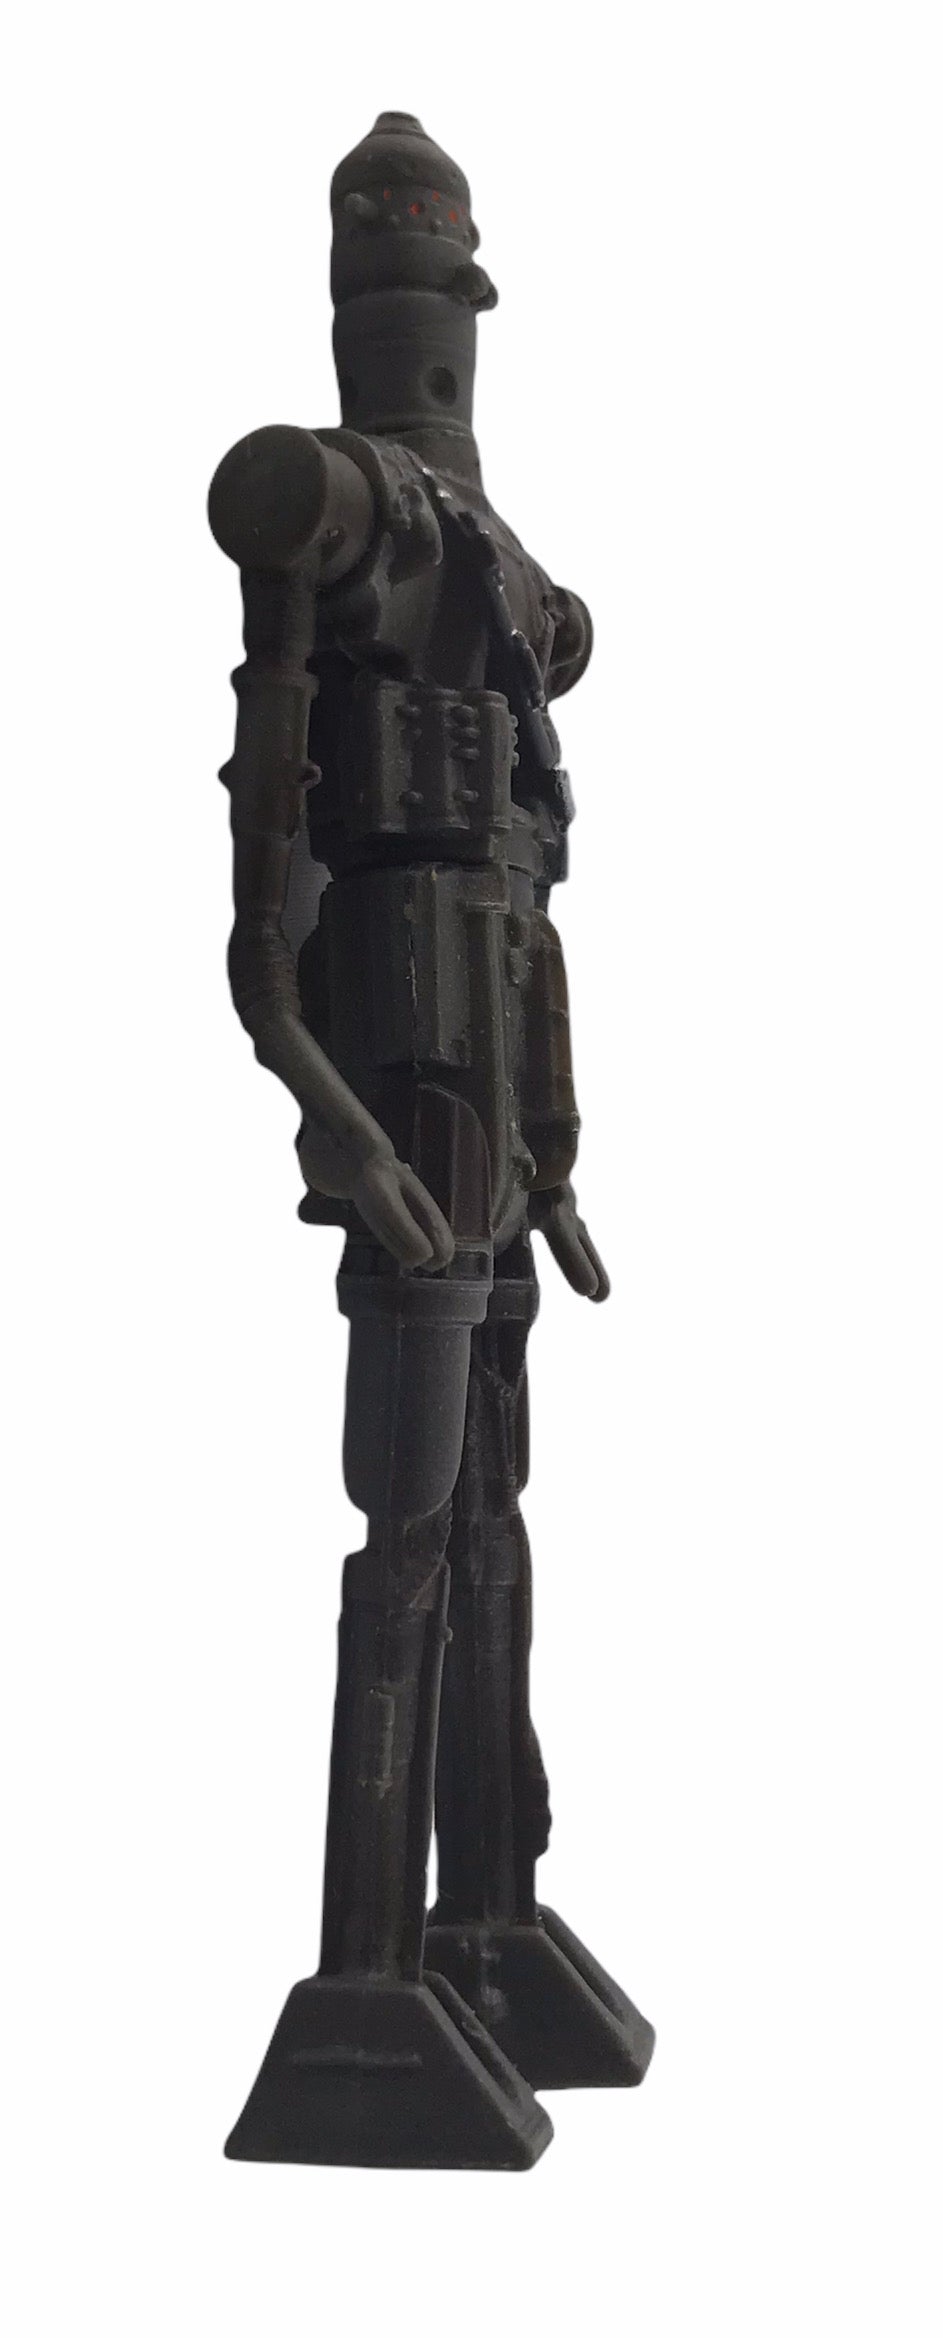 Star Wars Shadows of the Empire IG-88 3 3/4 Inch Action Figure 1996 Kenner